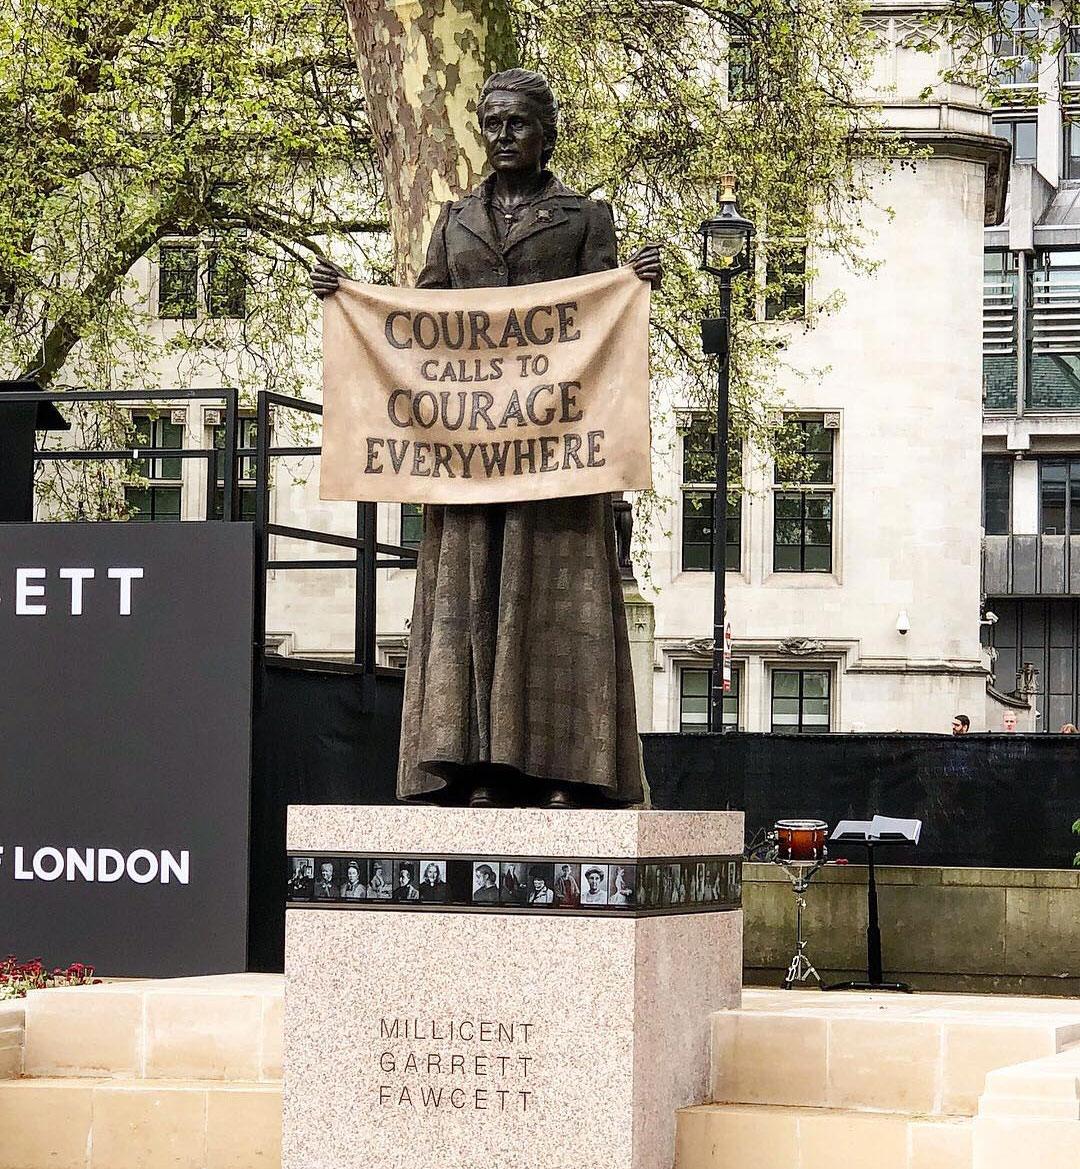 Gillian Wearing's statue of Millicent Fawcett, as unveiled in Parliament Square today. Image courtesy of the Mayor of London's Instagram